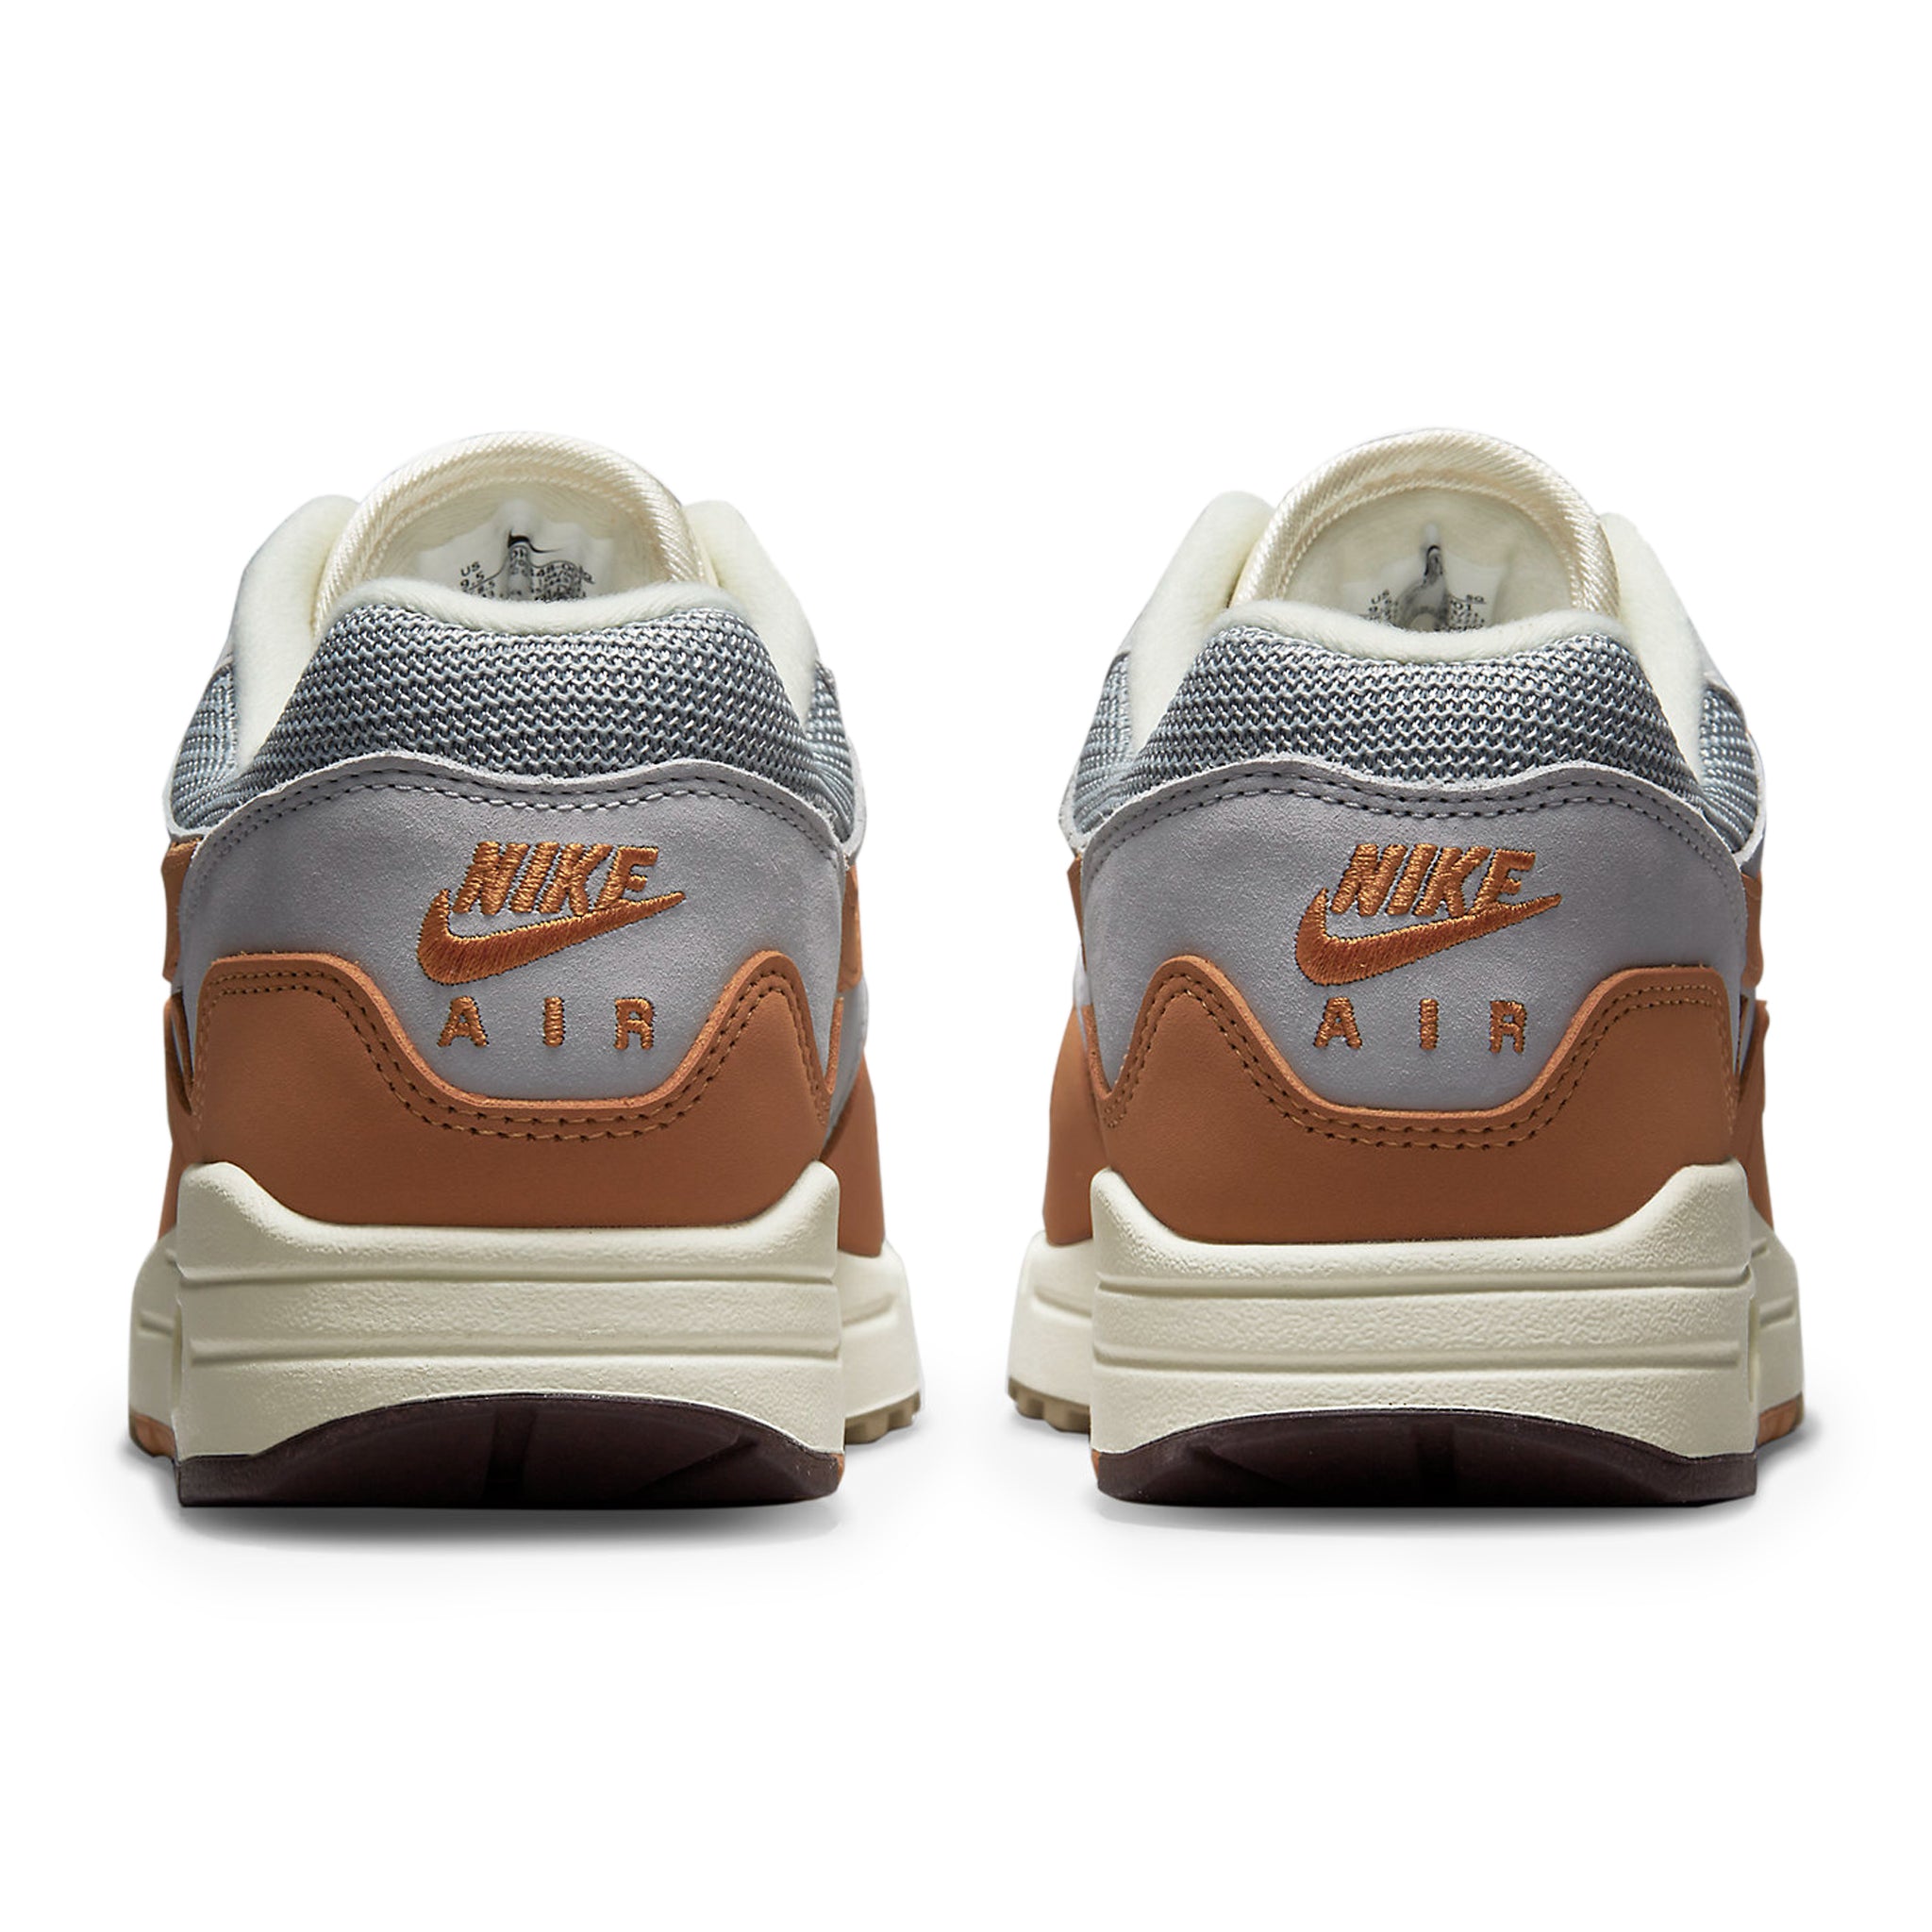 Heel view of Nike Air Max 1 Patta Waves Monarch (With Bracelet) DH1348-001